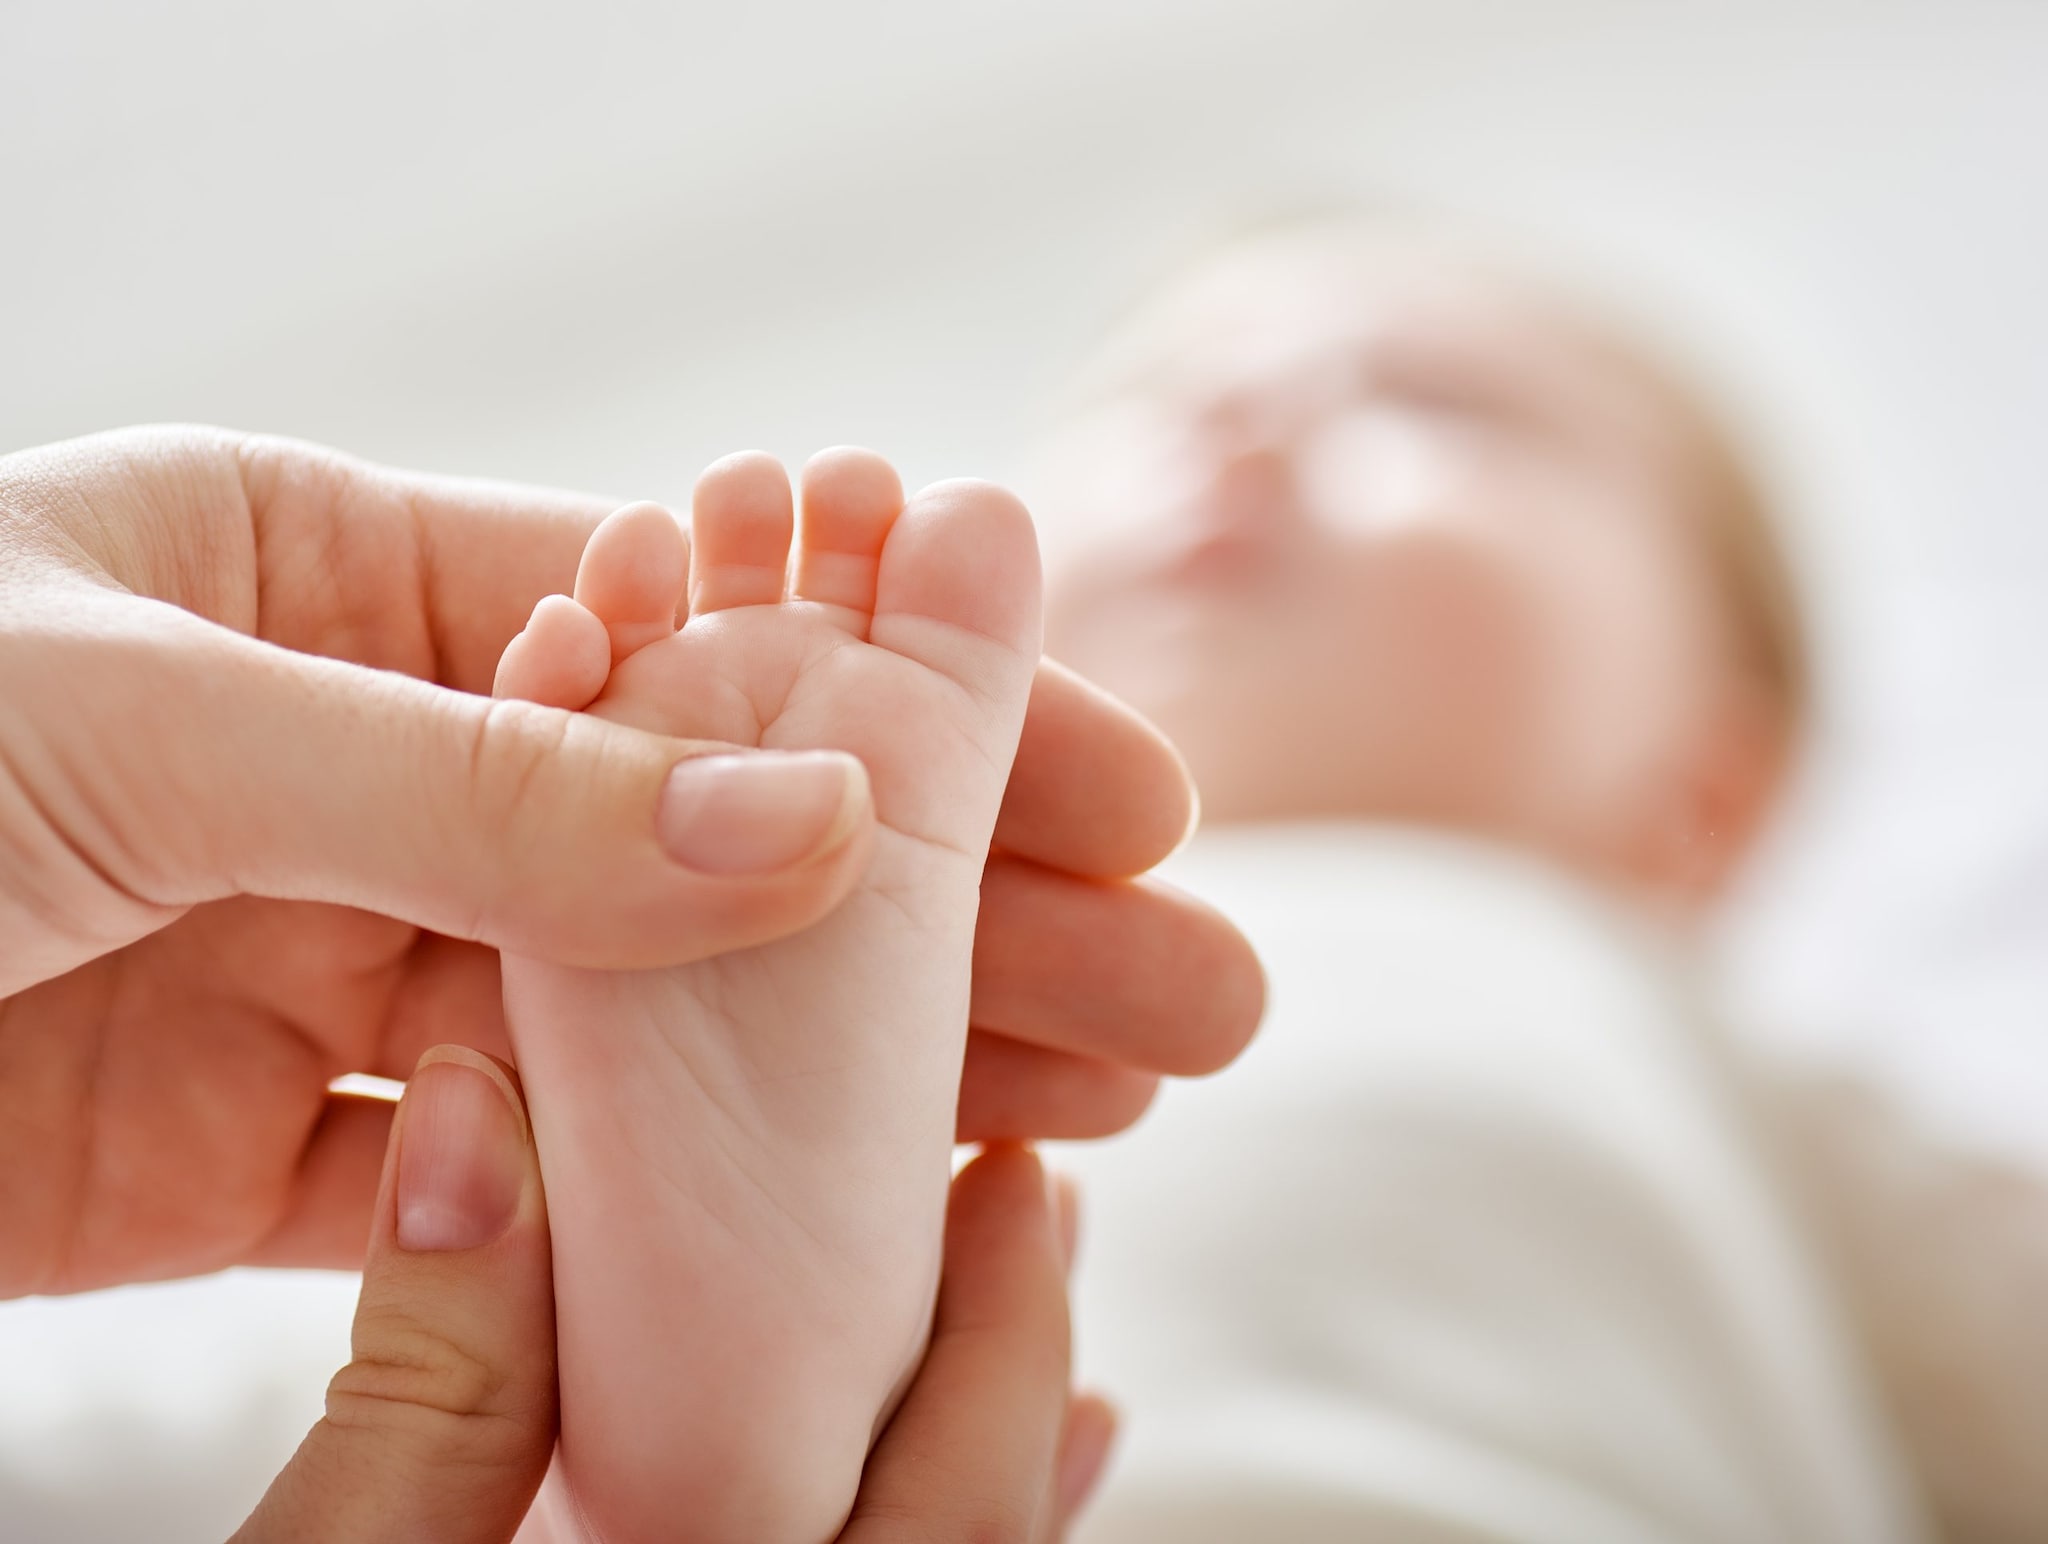 Image of a newborn's feet being held by mother.